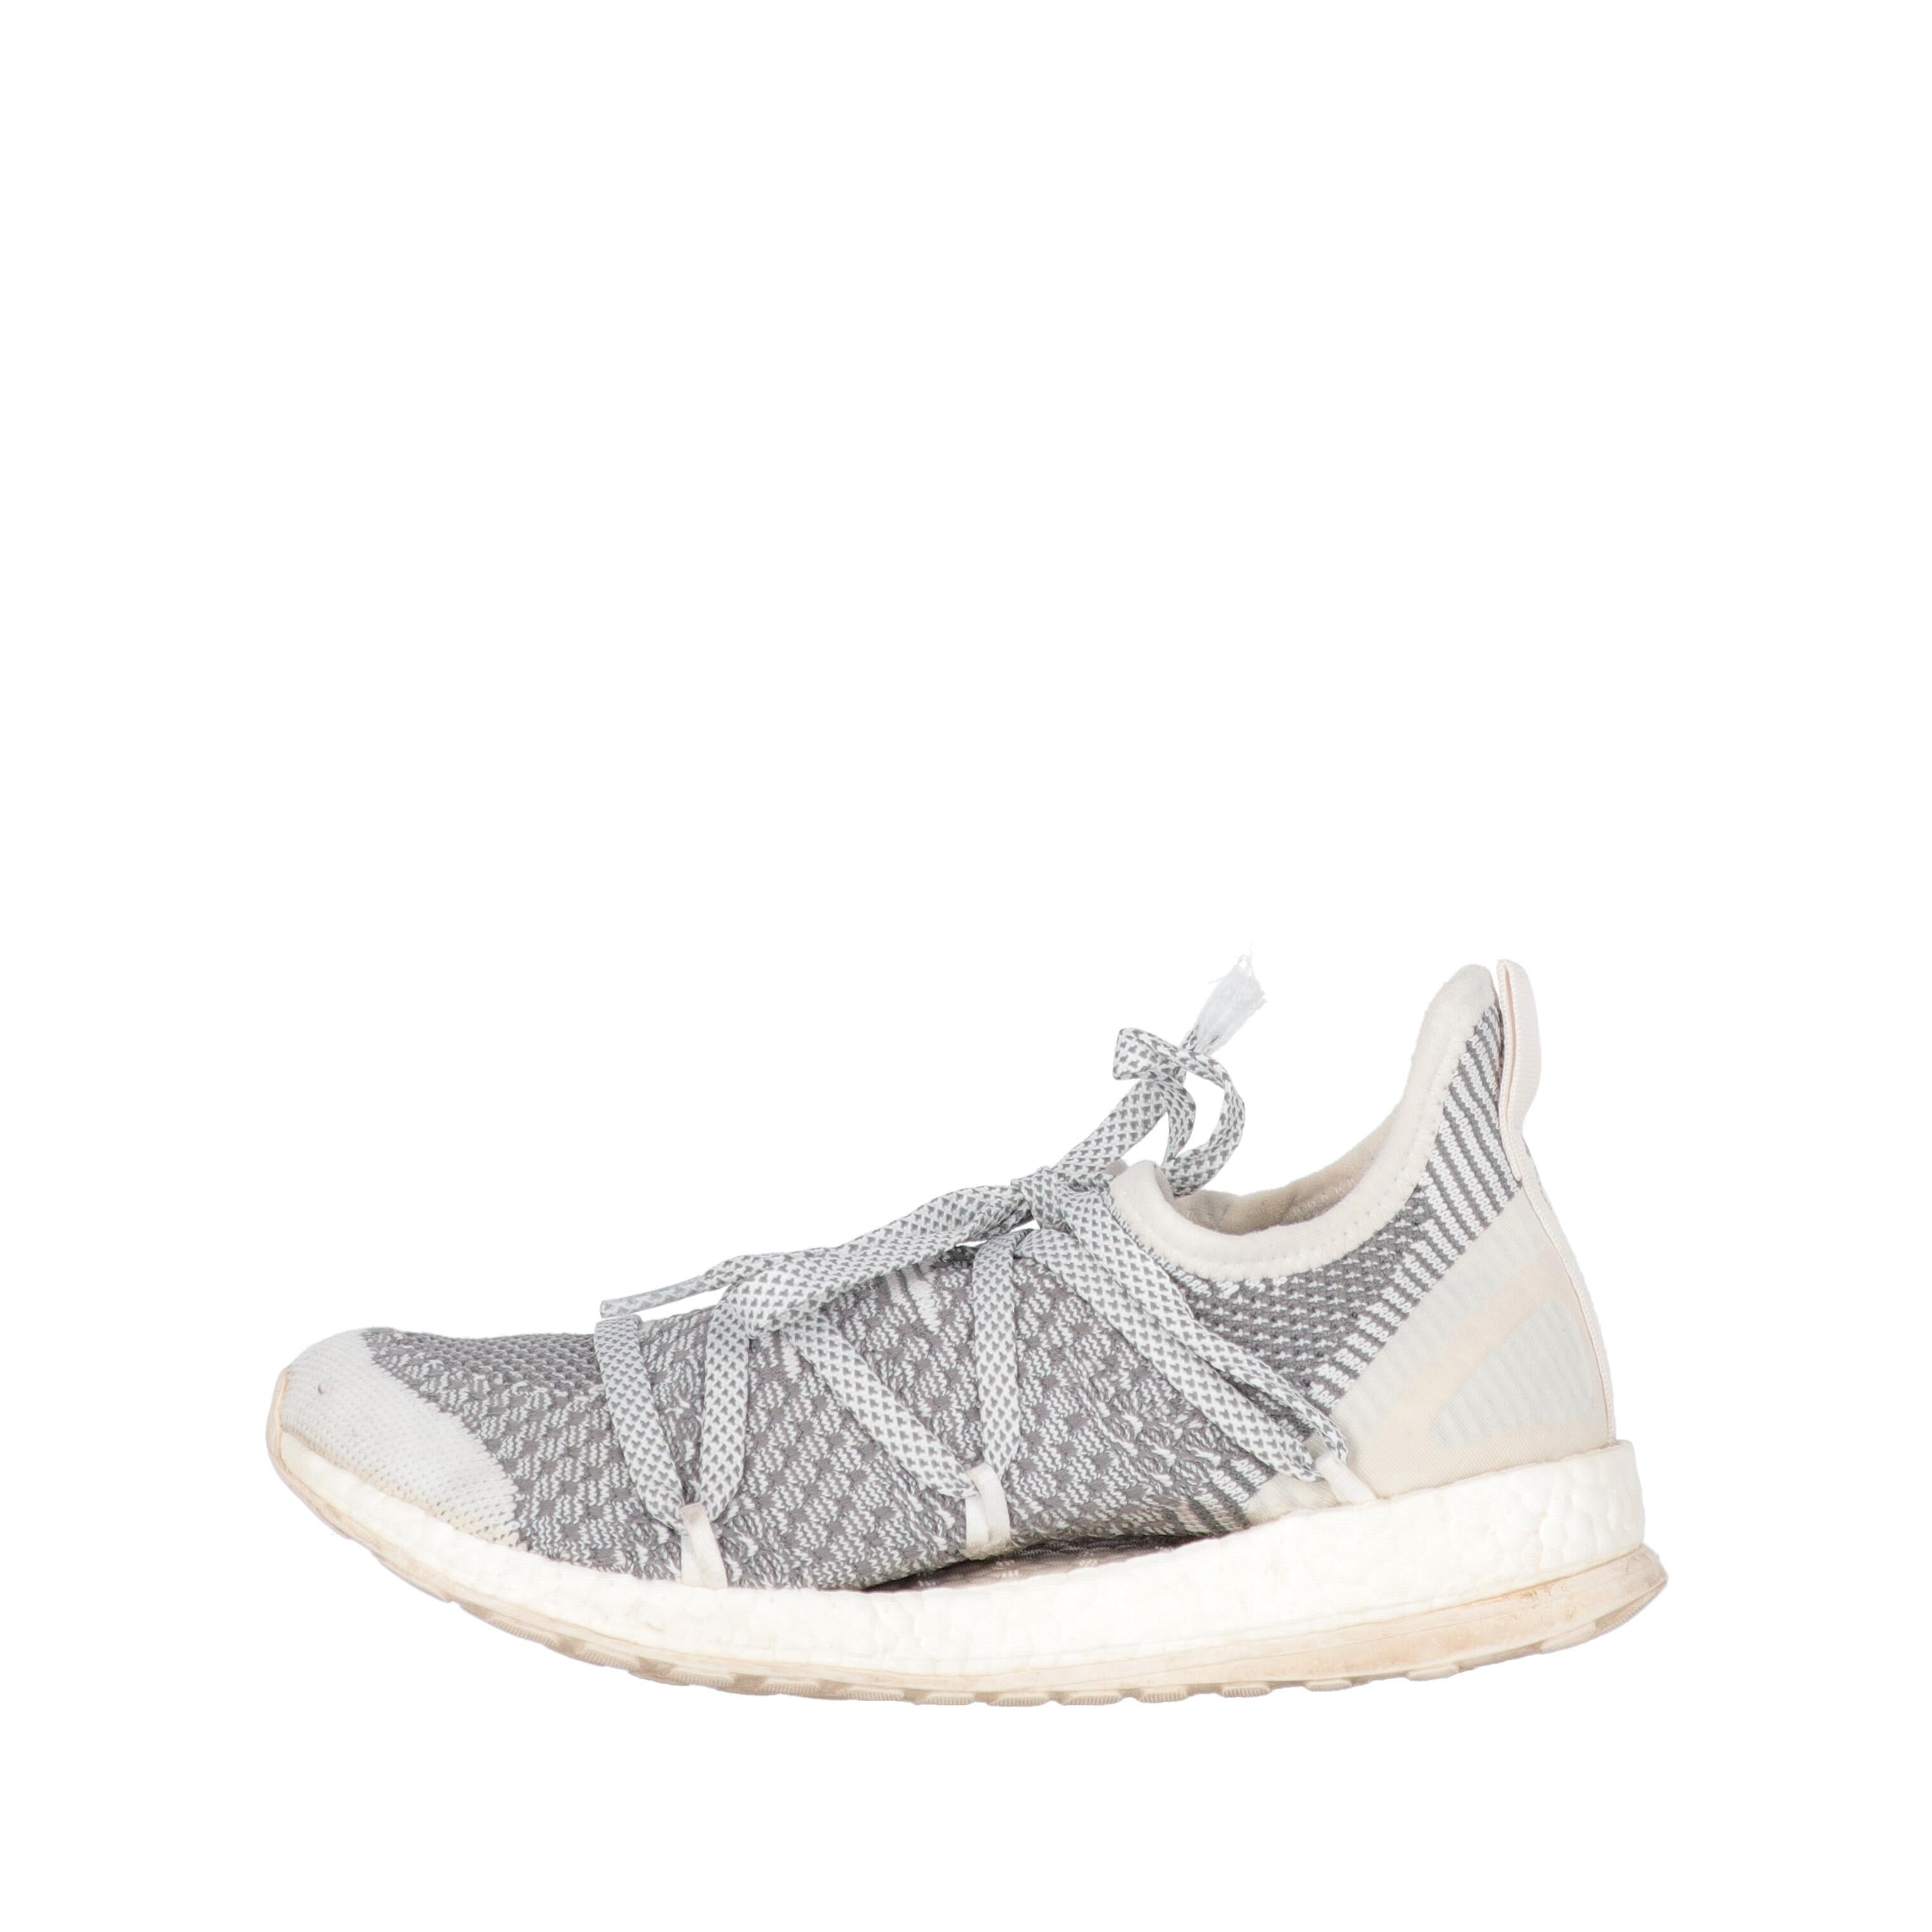 Adidas x Stella McCartney Ultraboost gray and white sneakers. Upper in stretch fabric with laces and synthetic material sole.

The shoes showed slight signs of wear, as shown in the pictures.

Years: 2010s

Made in China

Size: 37½ IT

Length